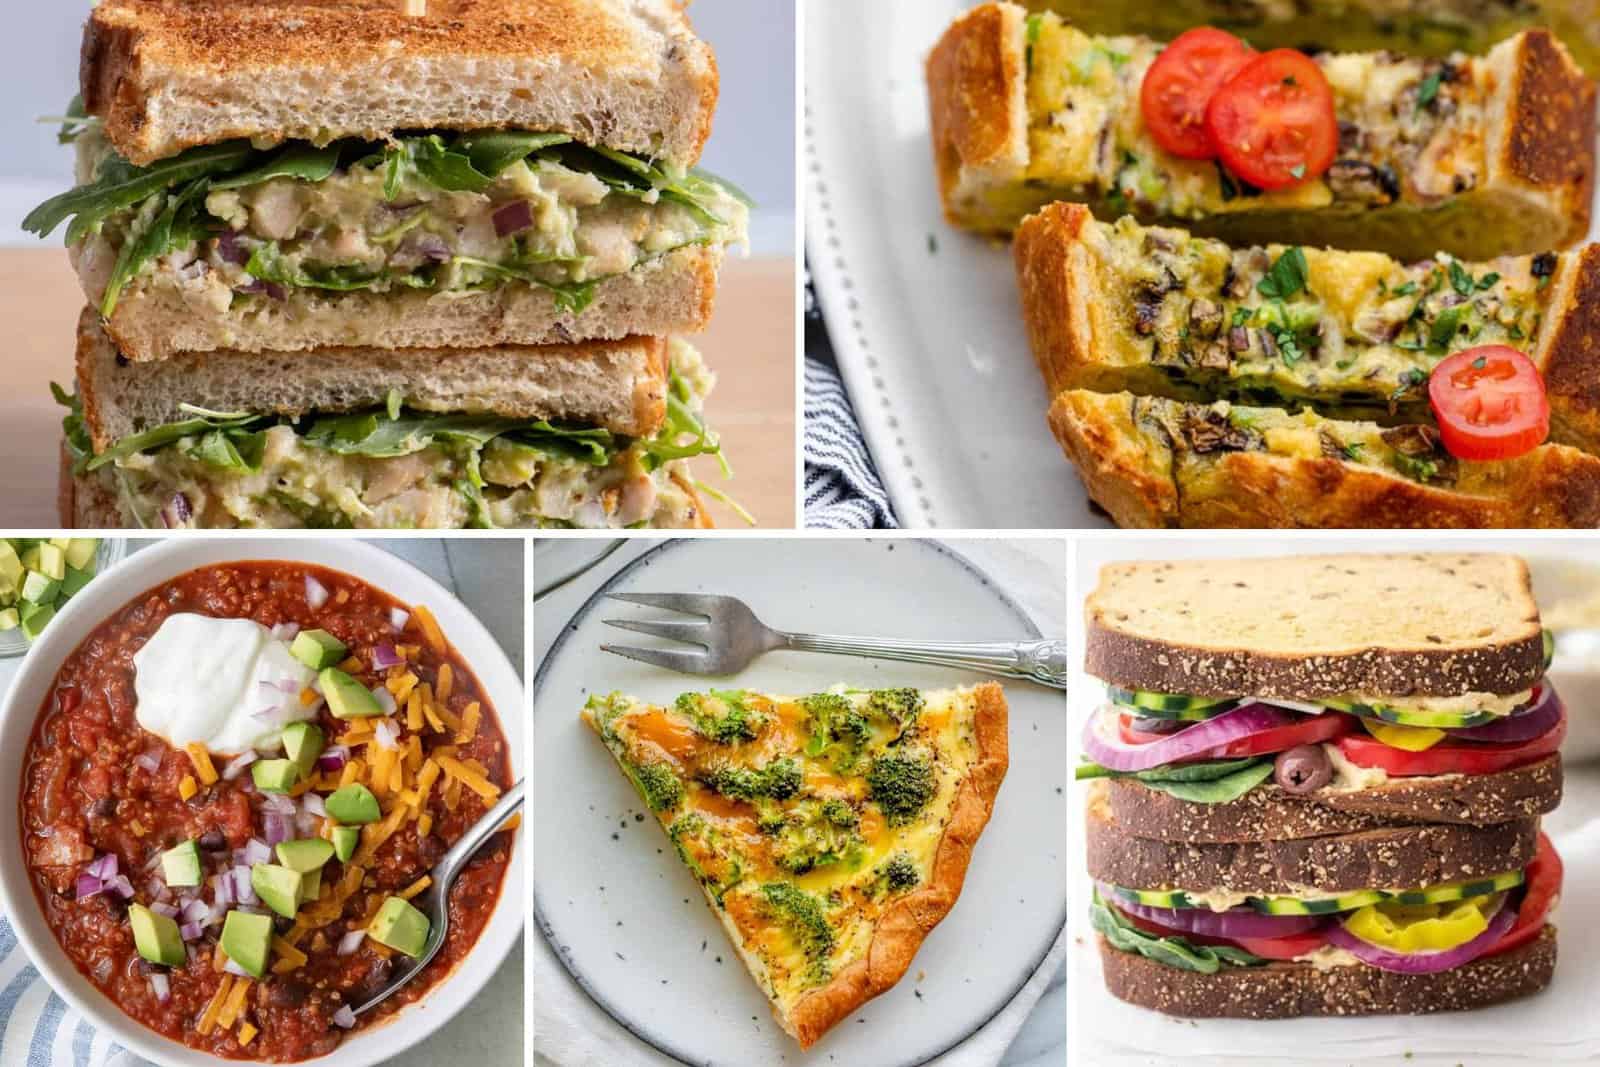 5 image collage of vegetarian recipes perfect for meal prepping.